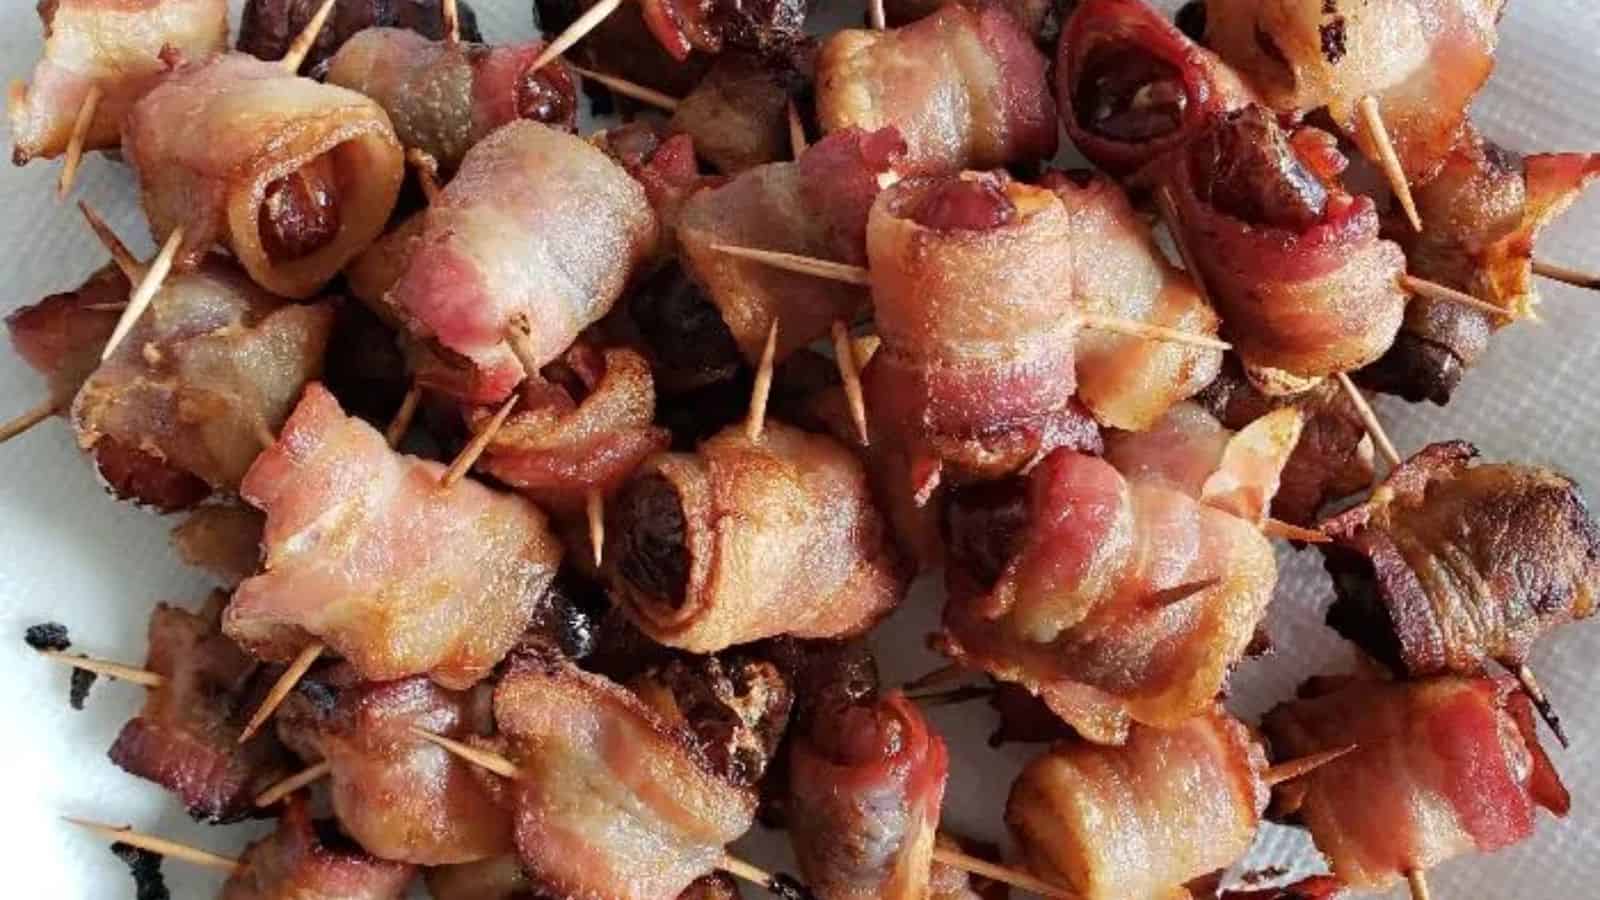 Image shows an overhead shot closeup of Bacon Wrapped Dates.